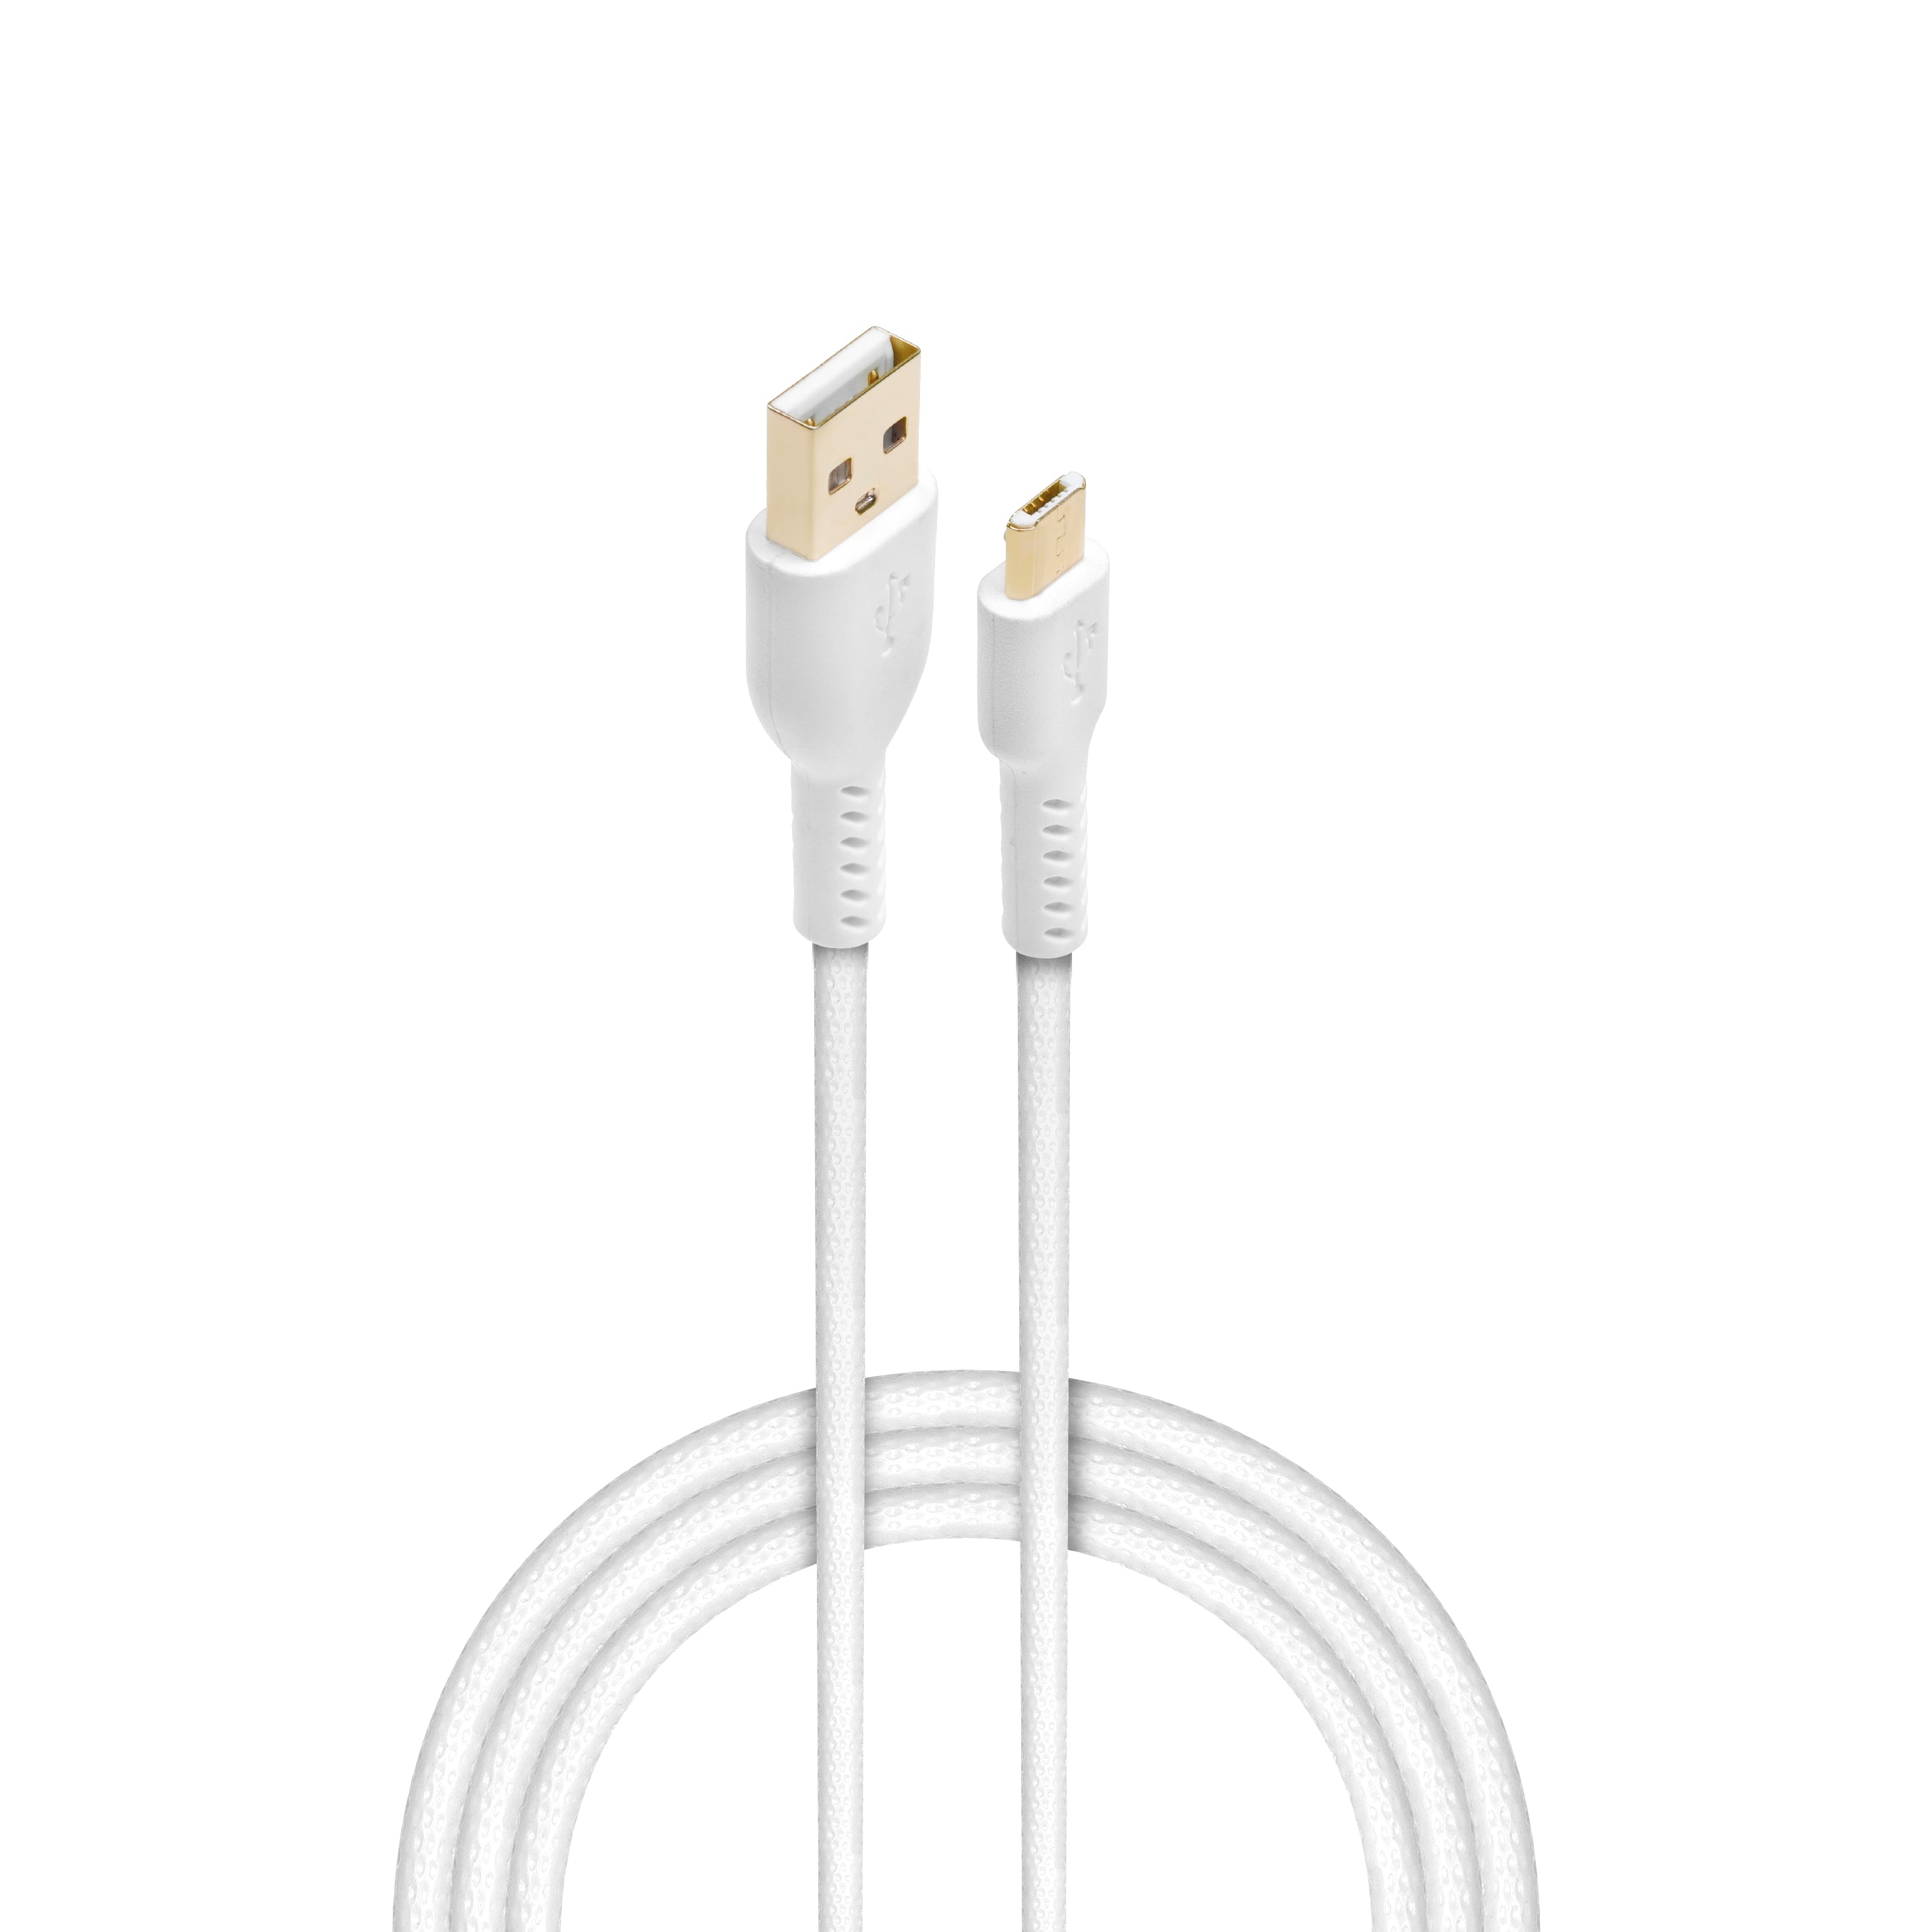 Hyper micro USB cable White (1.5M) Micro USB Cable  (Compatible with All mobiles and tablets)(White)